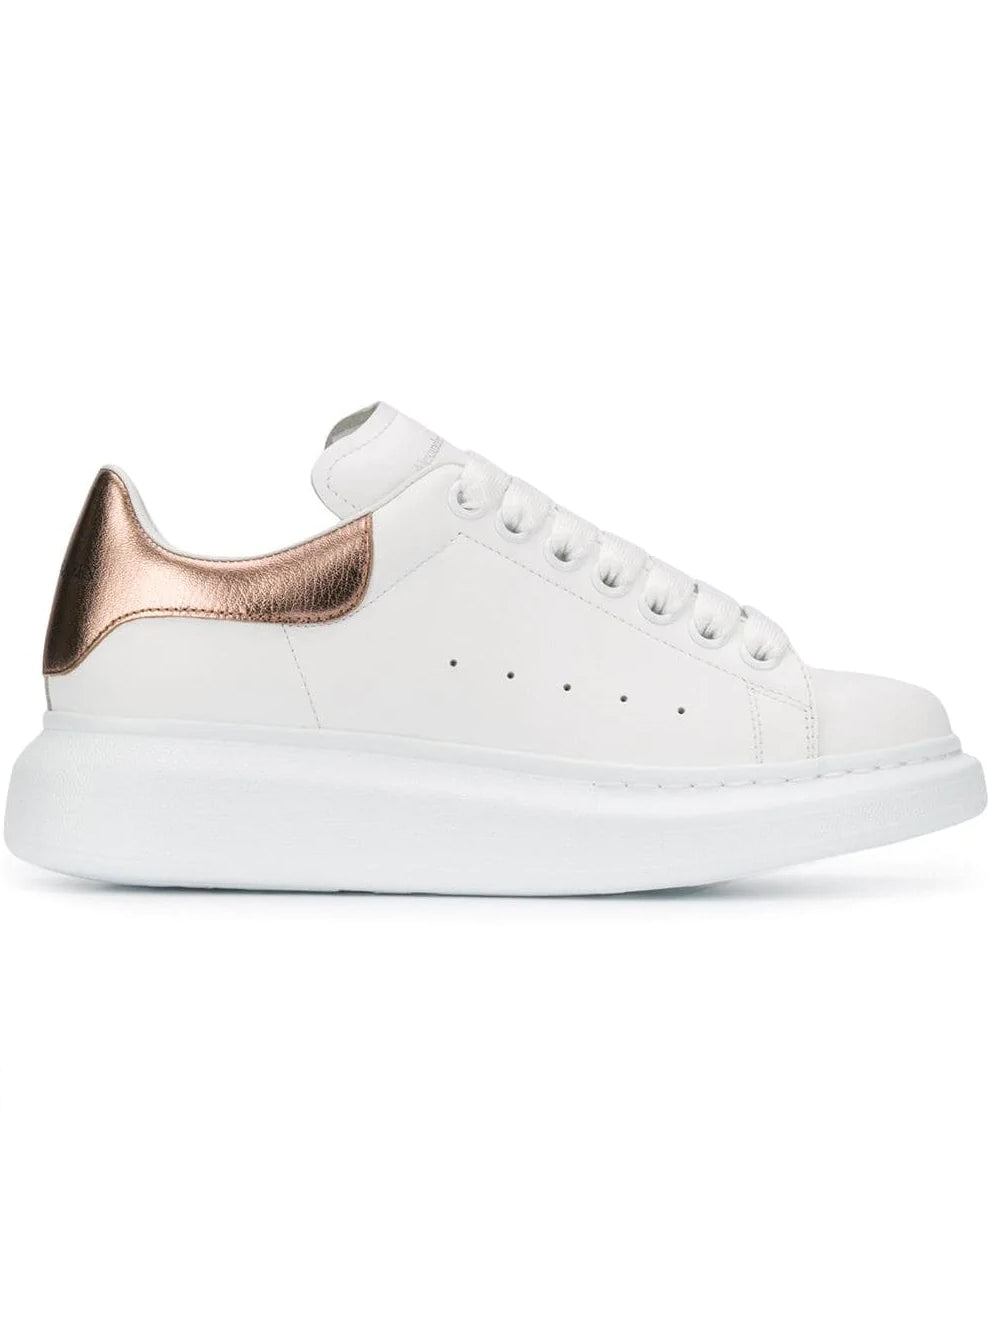 Alexander McQueen Leather White and Rose Gold